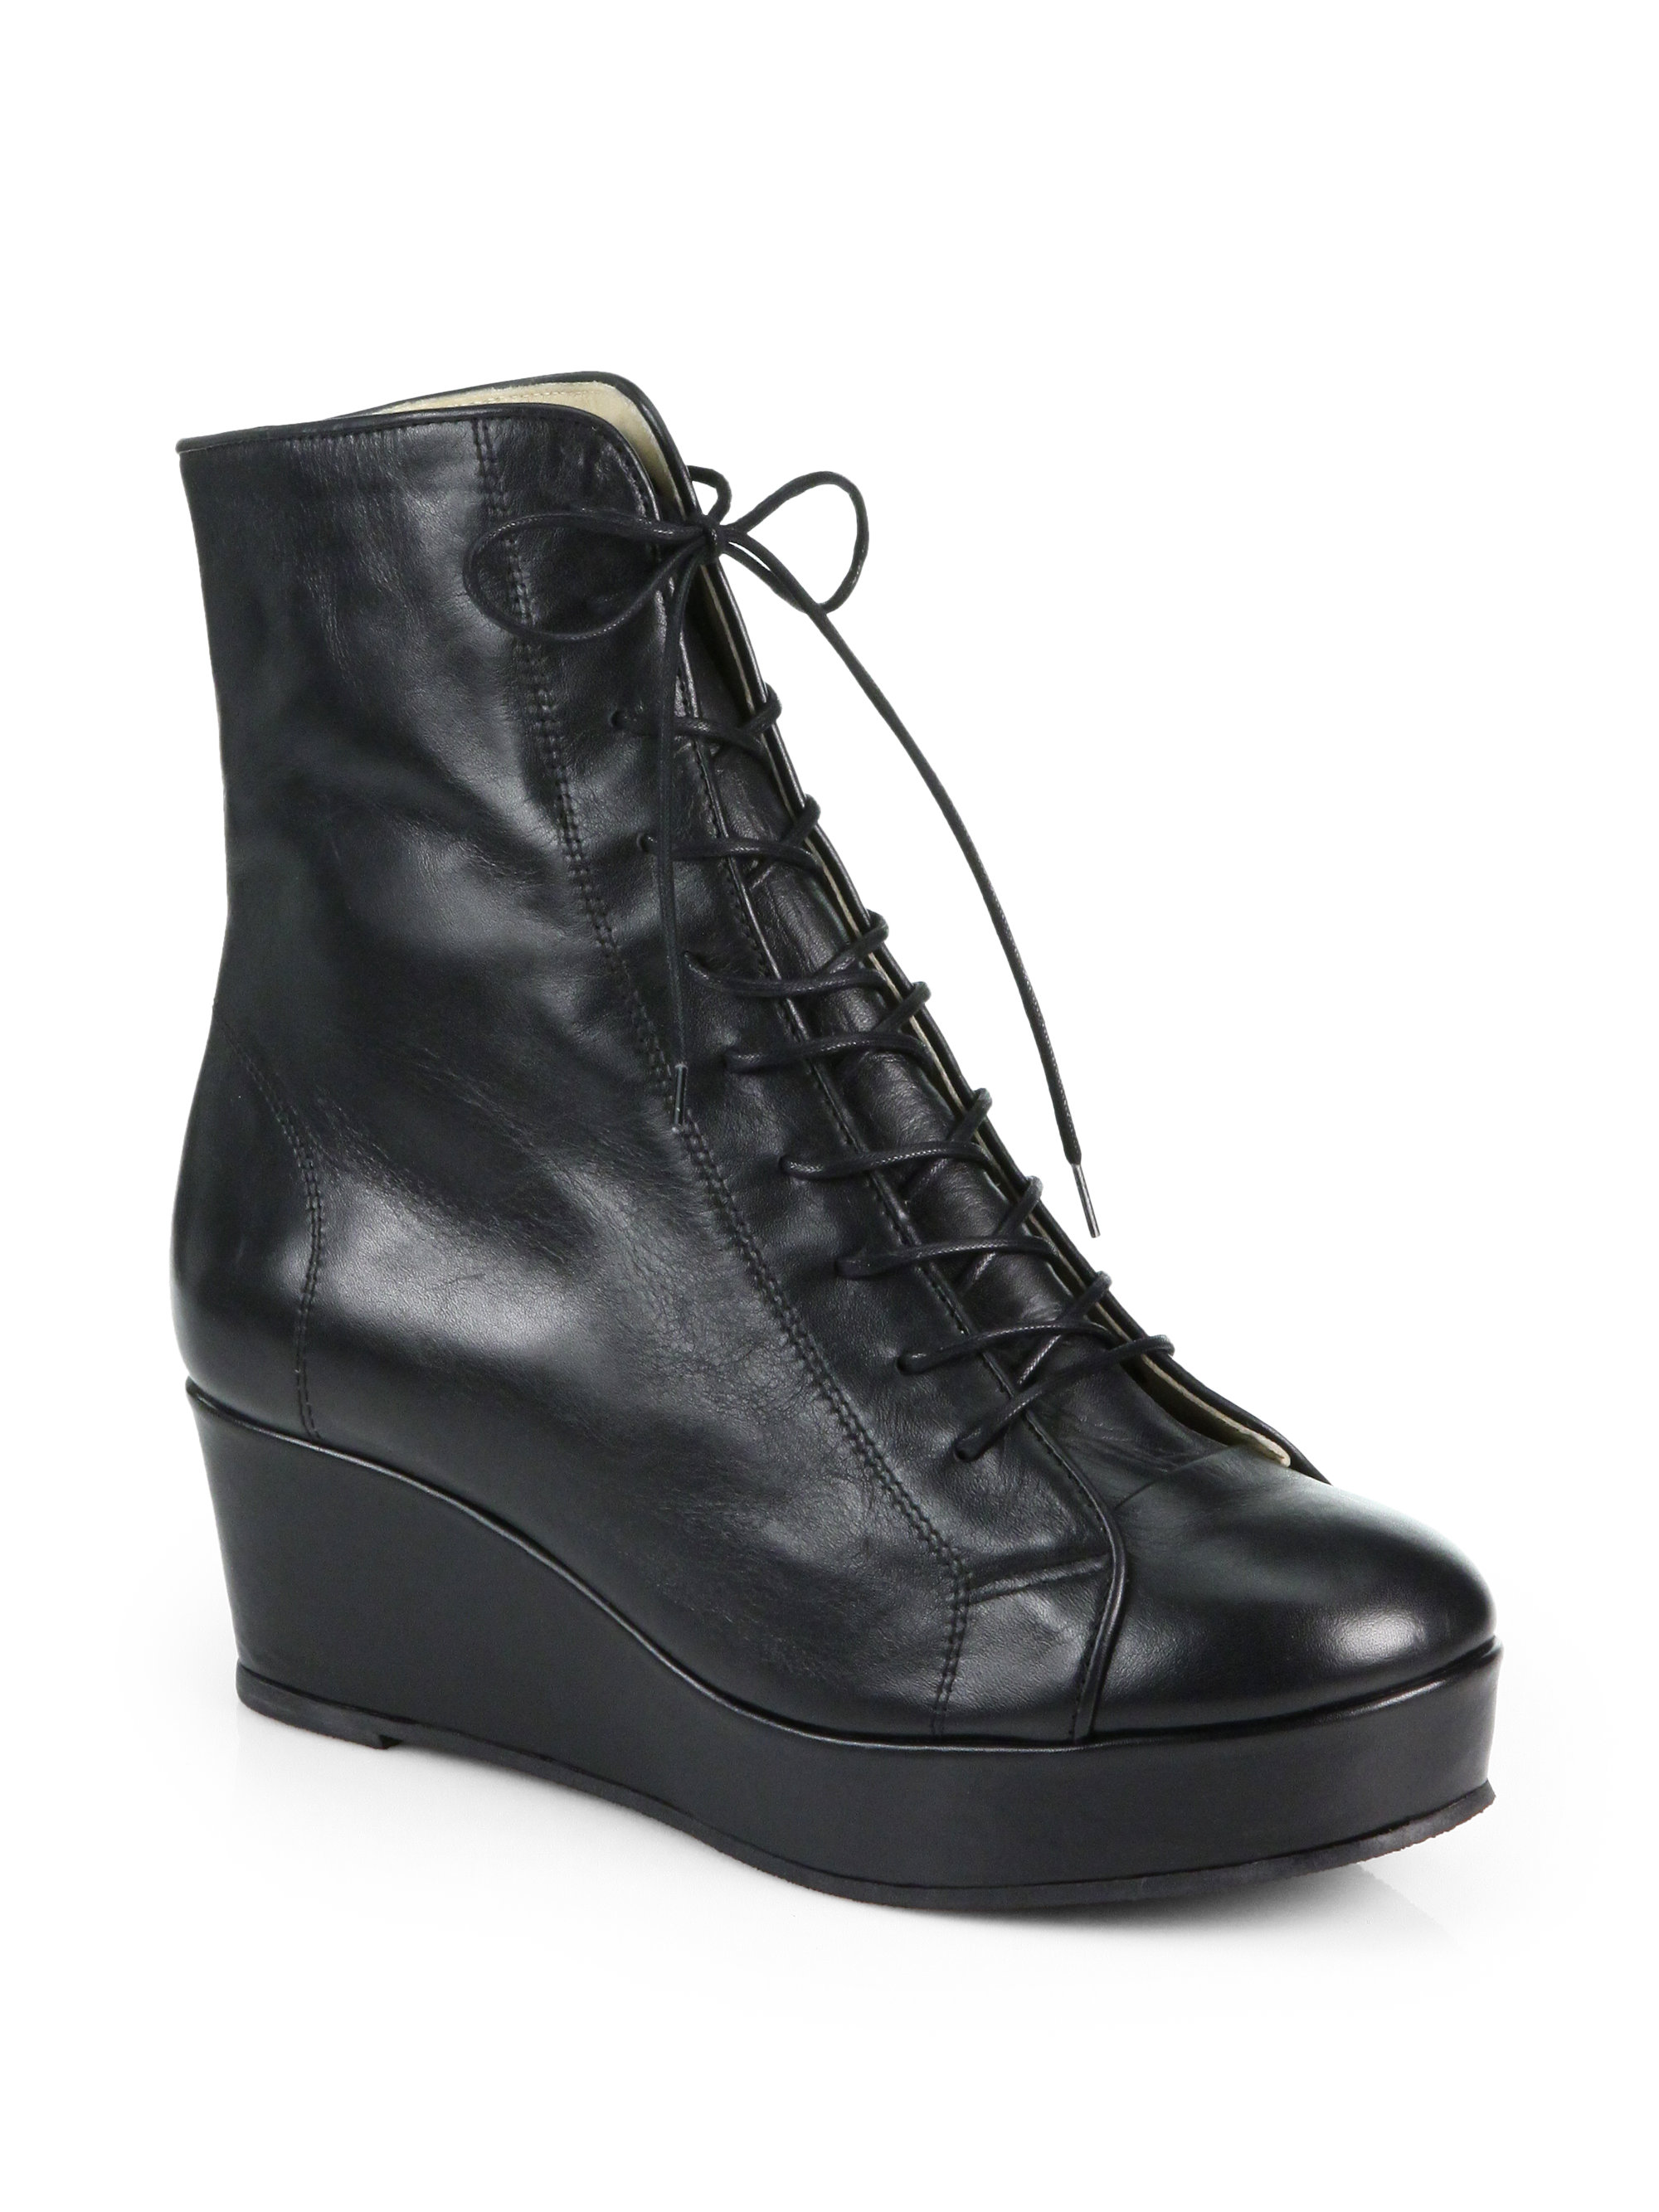 Opening Ceremony Bumper Leather Laceup Ankle Boots in Black | Lyst